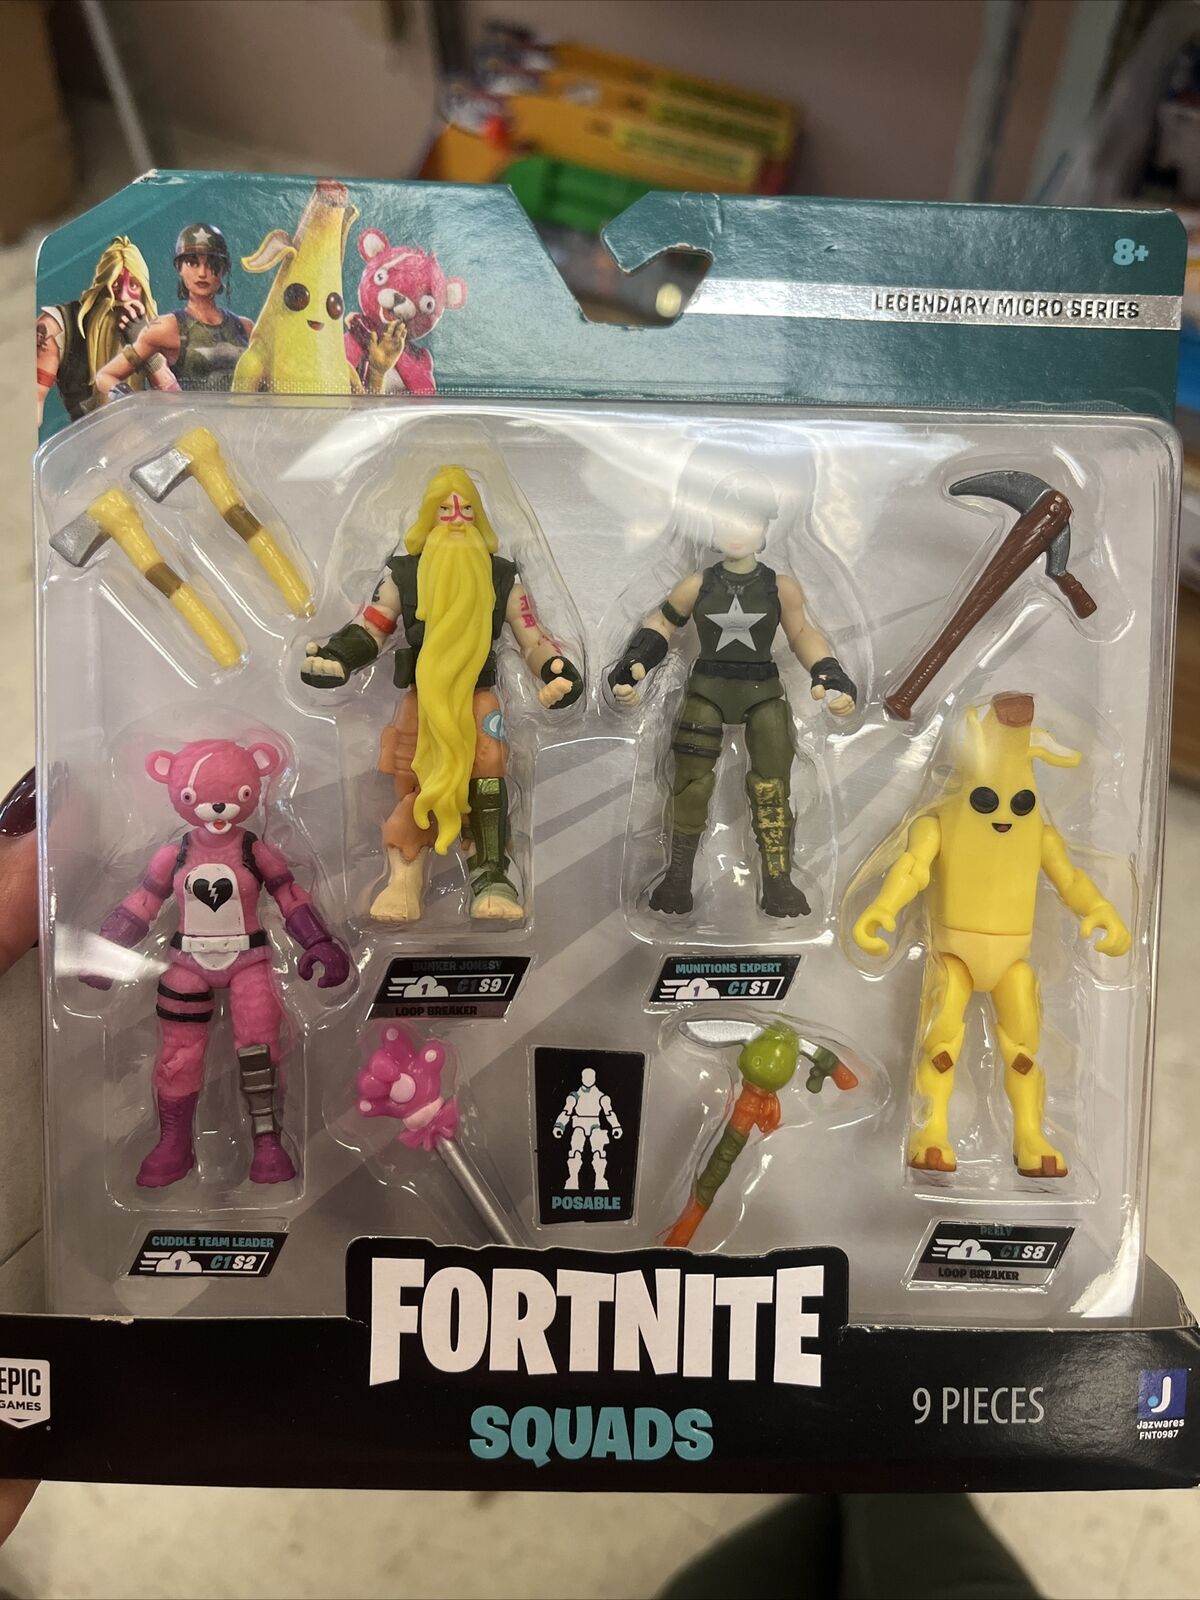 Fortnite Micro Legendary Series Squad Mode, Four 2.5-inch Highly Detailed Figure